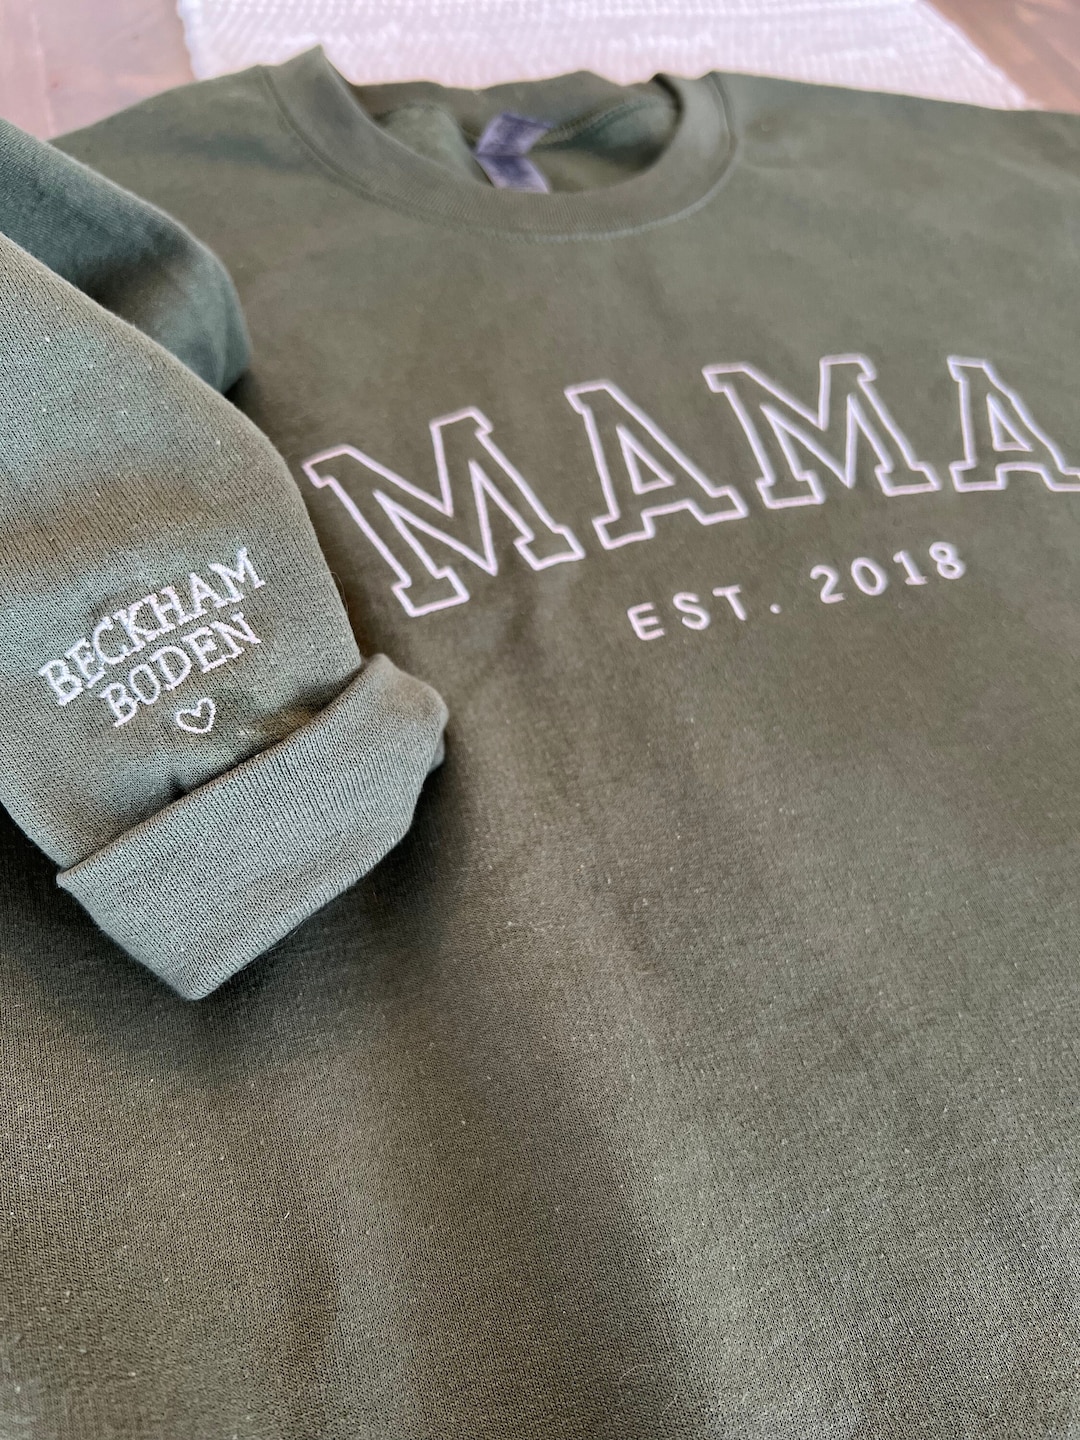 Custom Embroidered Sweatshirt for Mom Personalized Sleeve